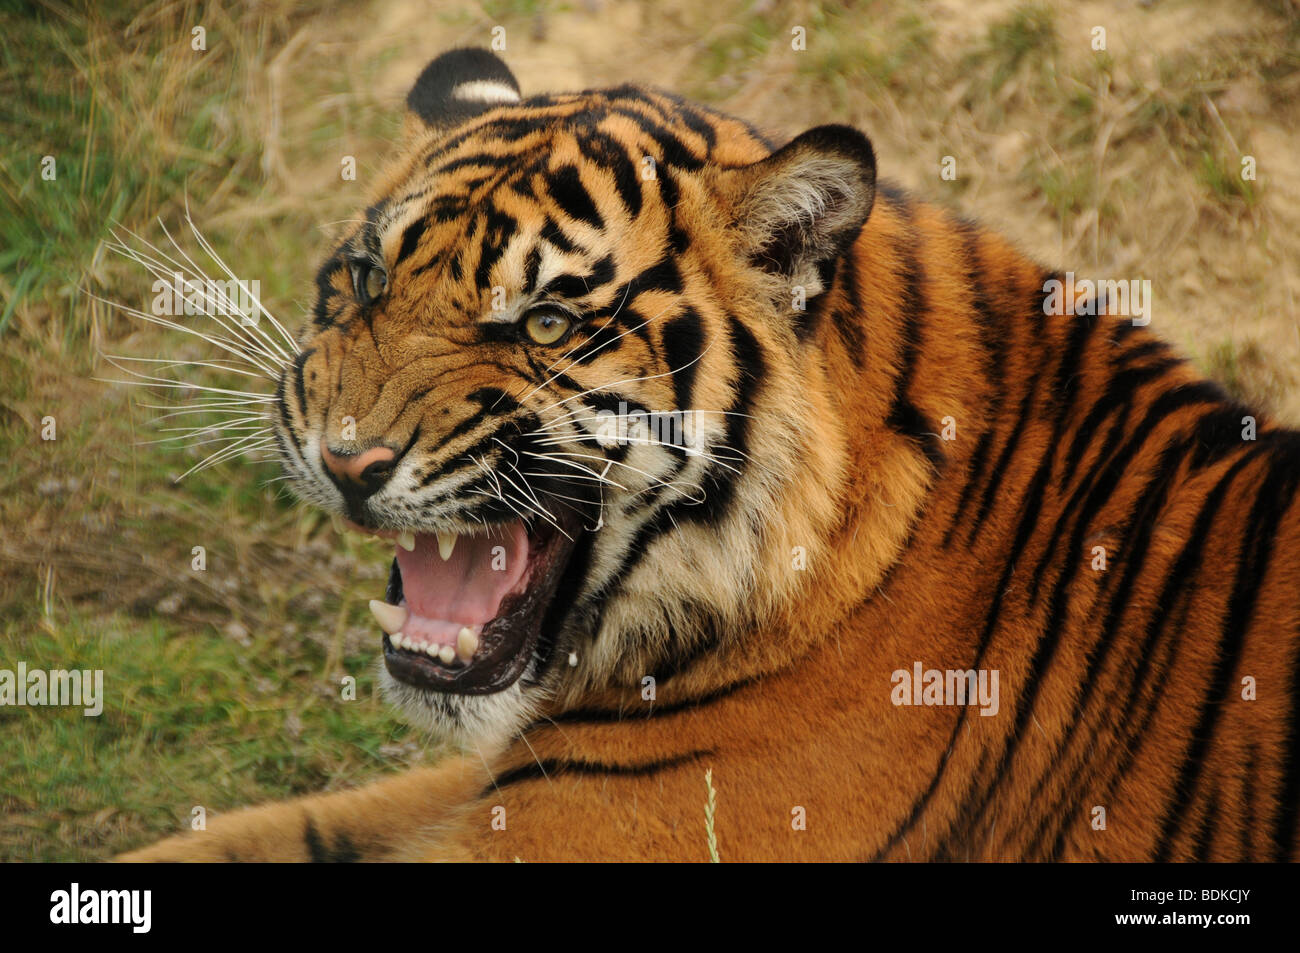 tiger growling Stock Photo